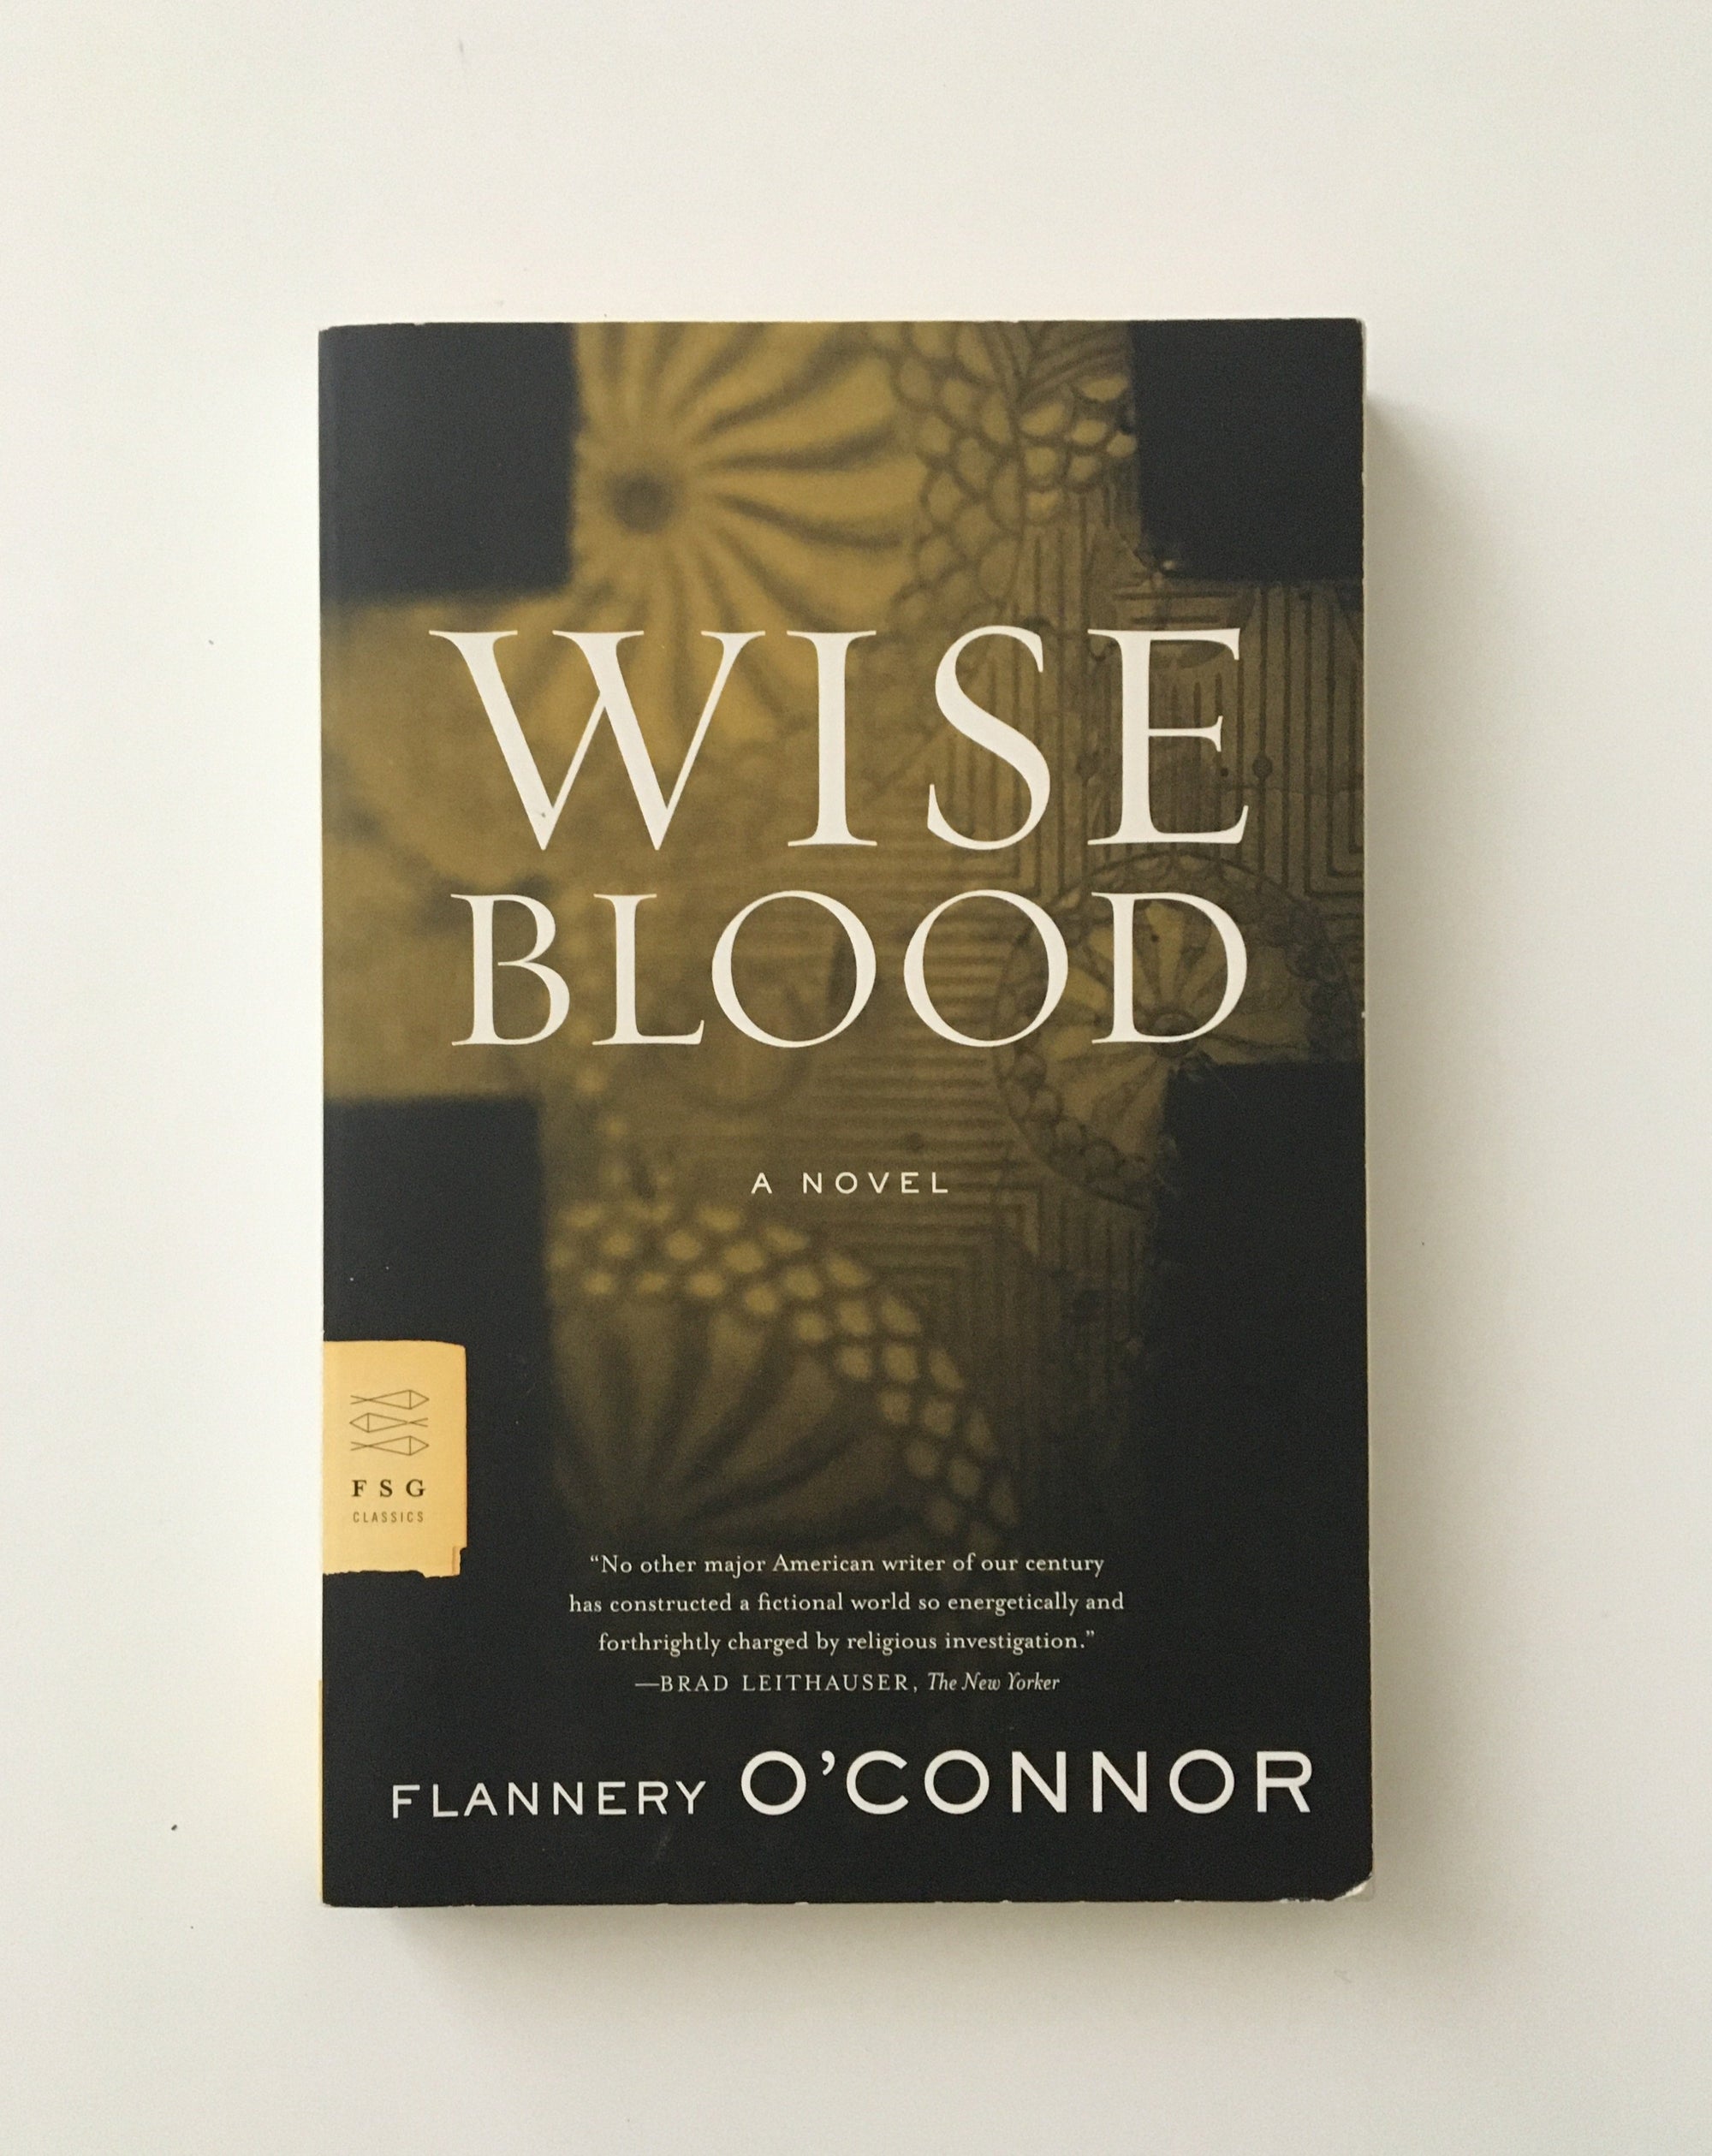 Wise Blood by Flannery O'Connor, book, Ten Dollar Books, Ten Dollar Books